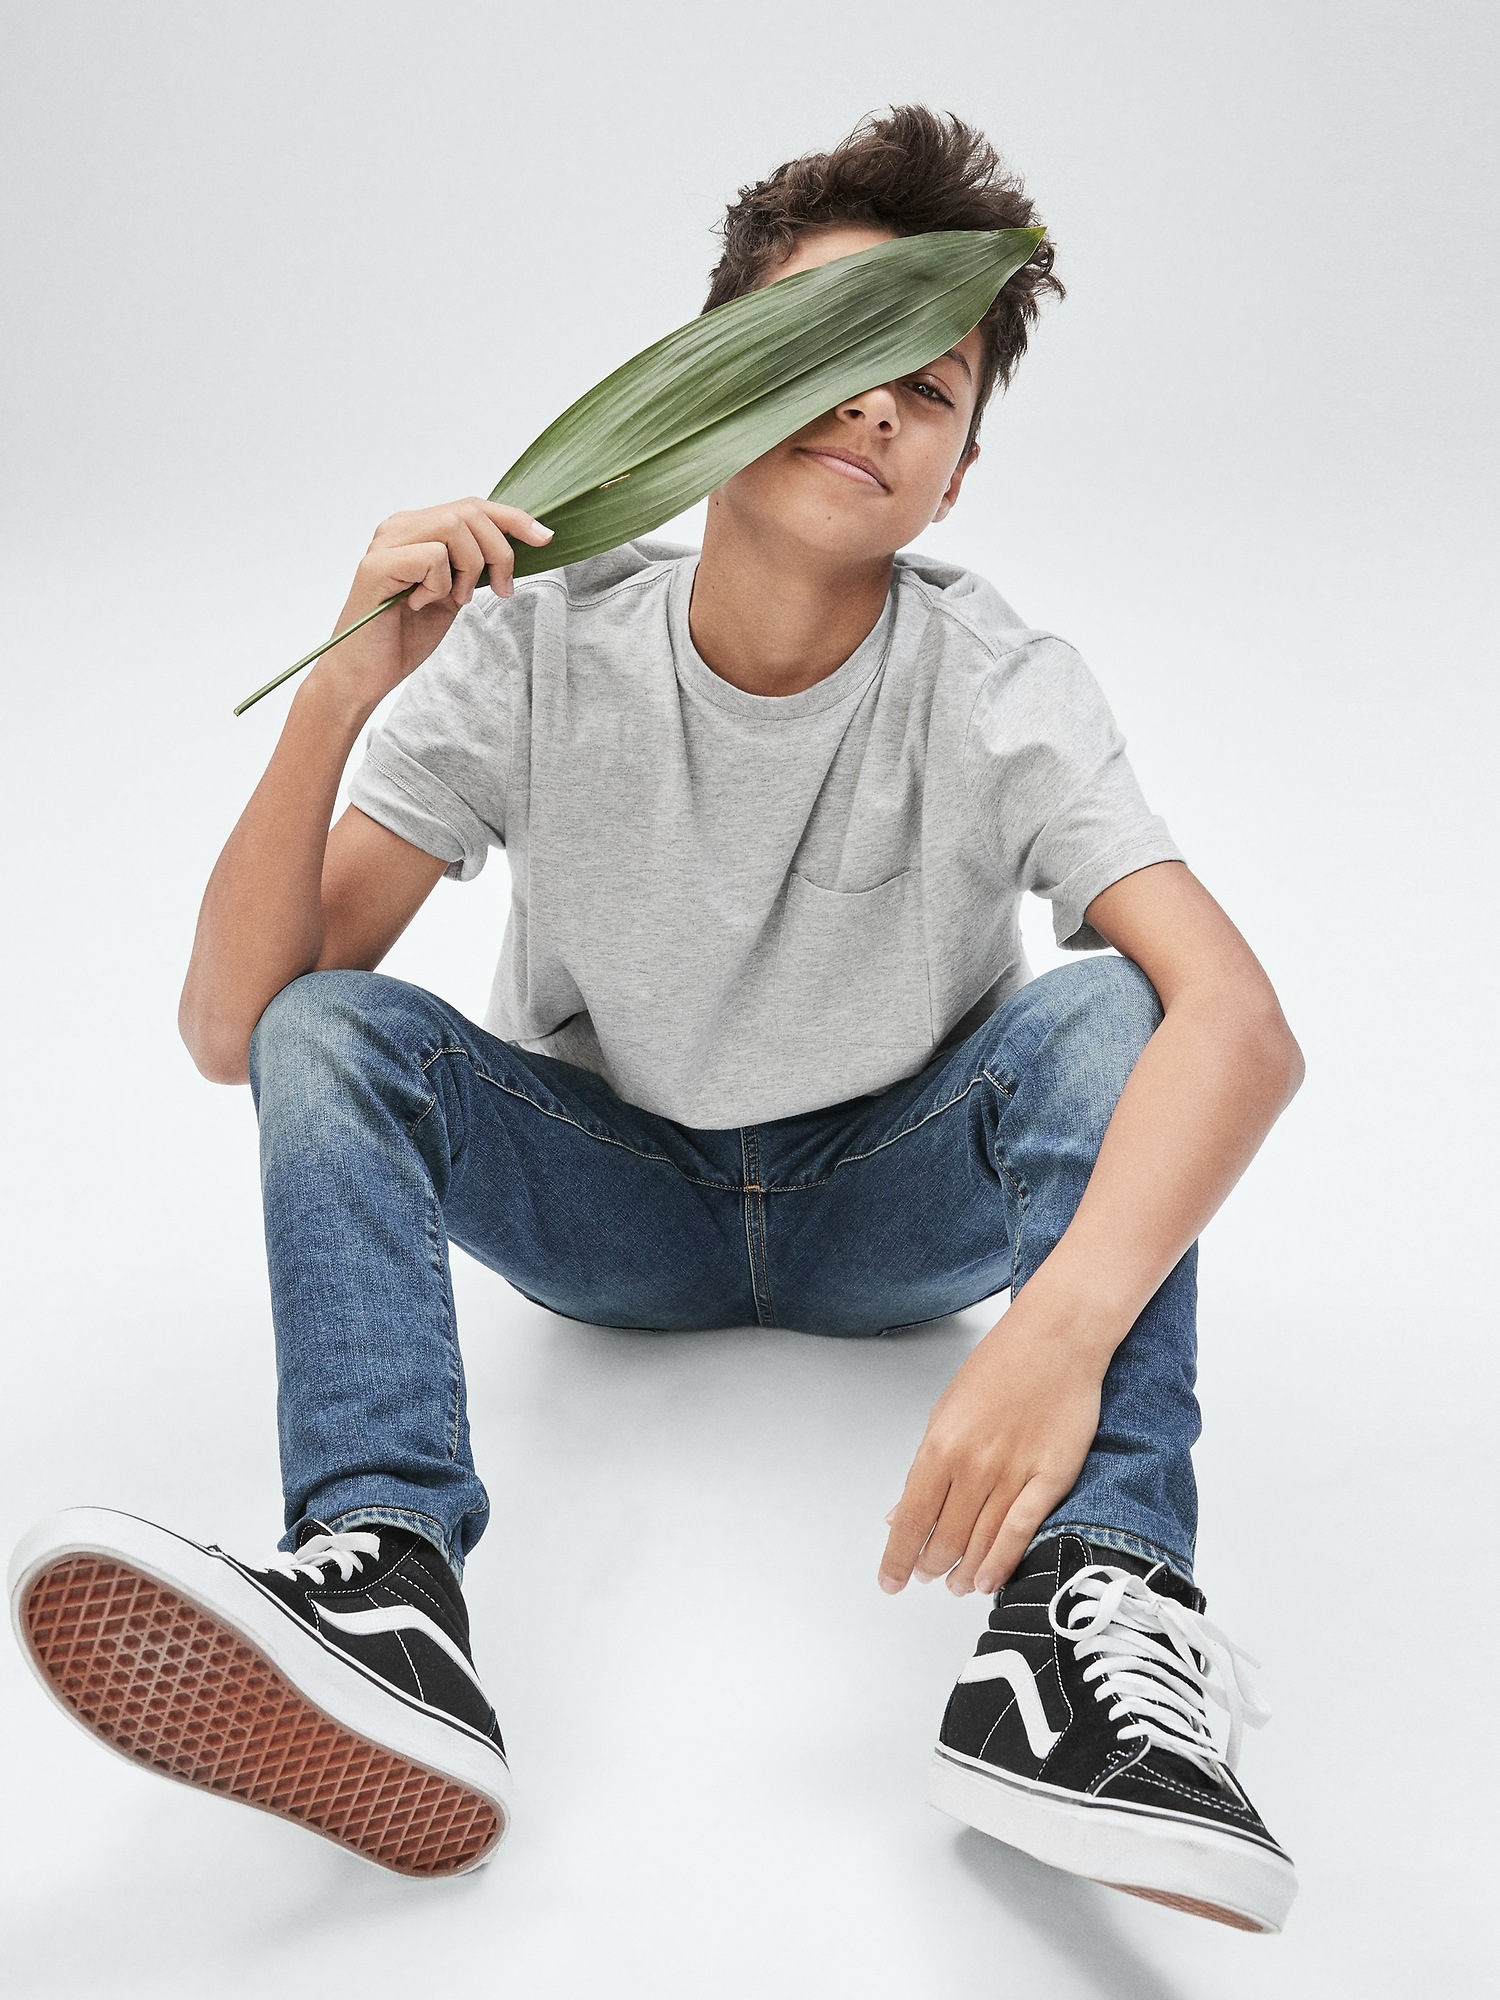 Gap - The Gen Good Slim Fit Jeans With Washwell™